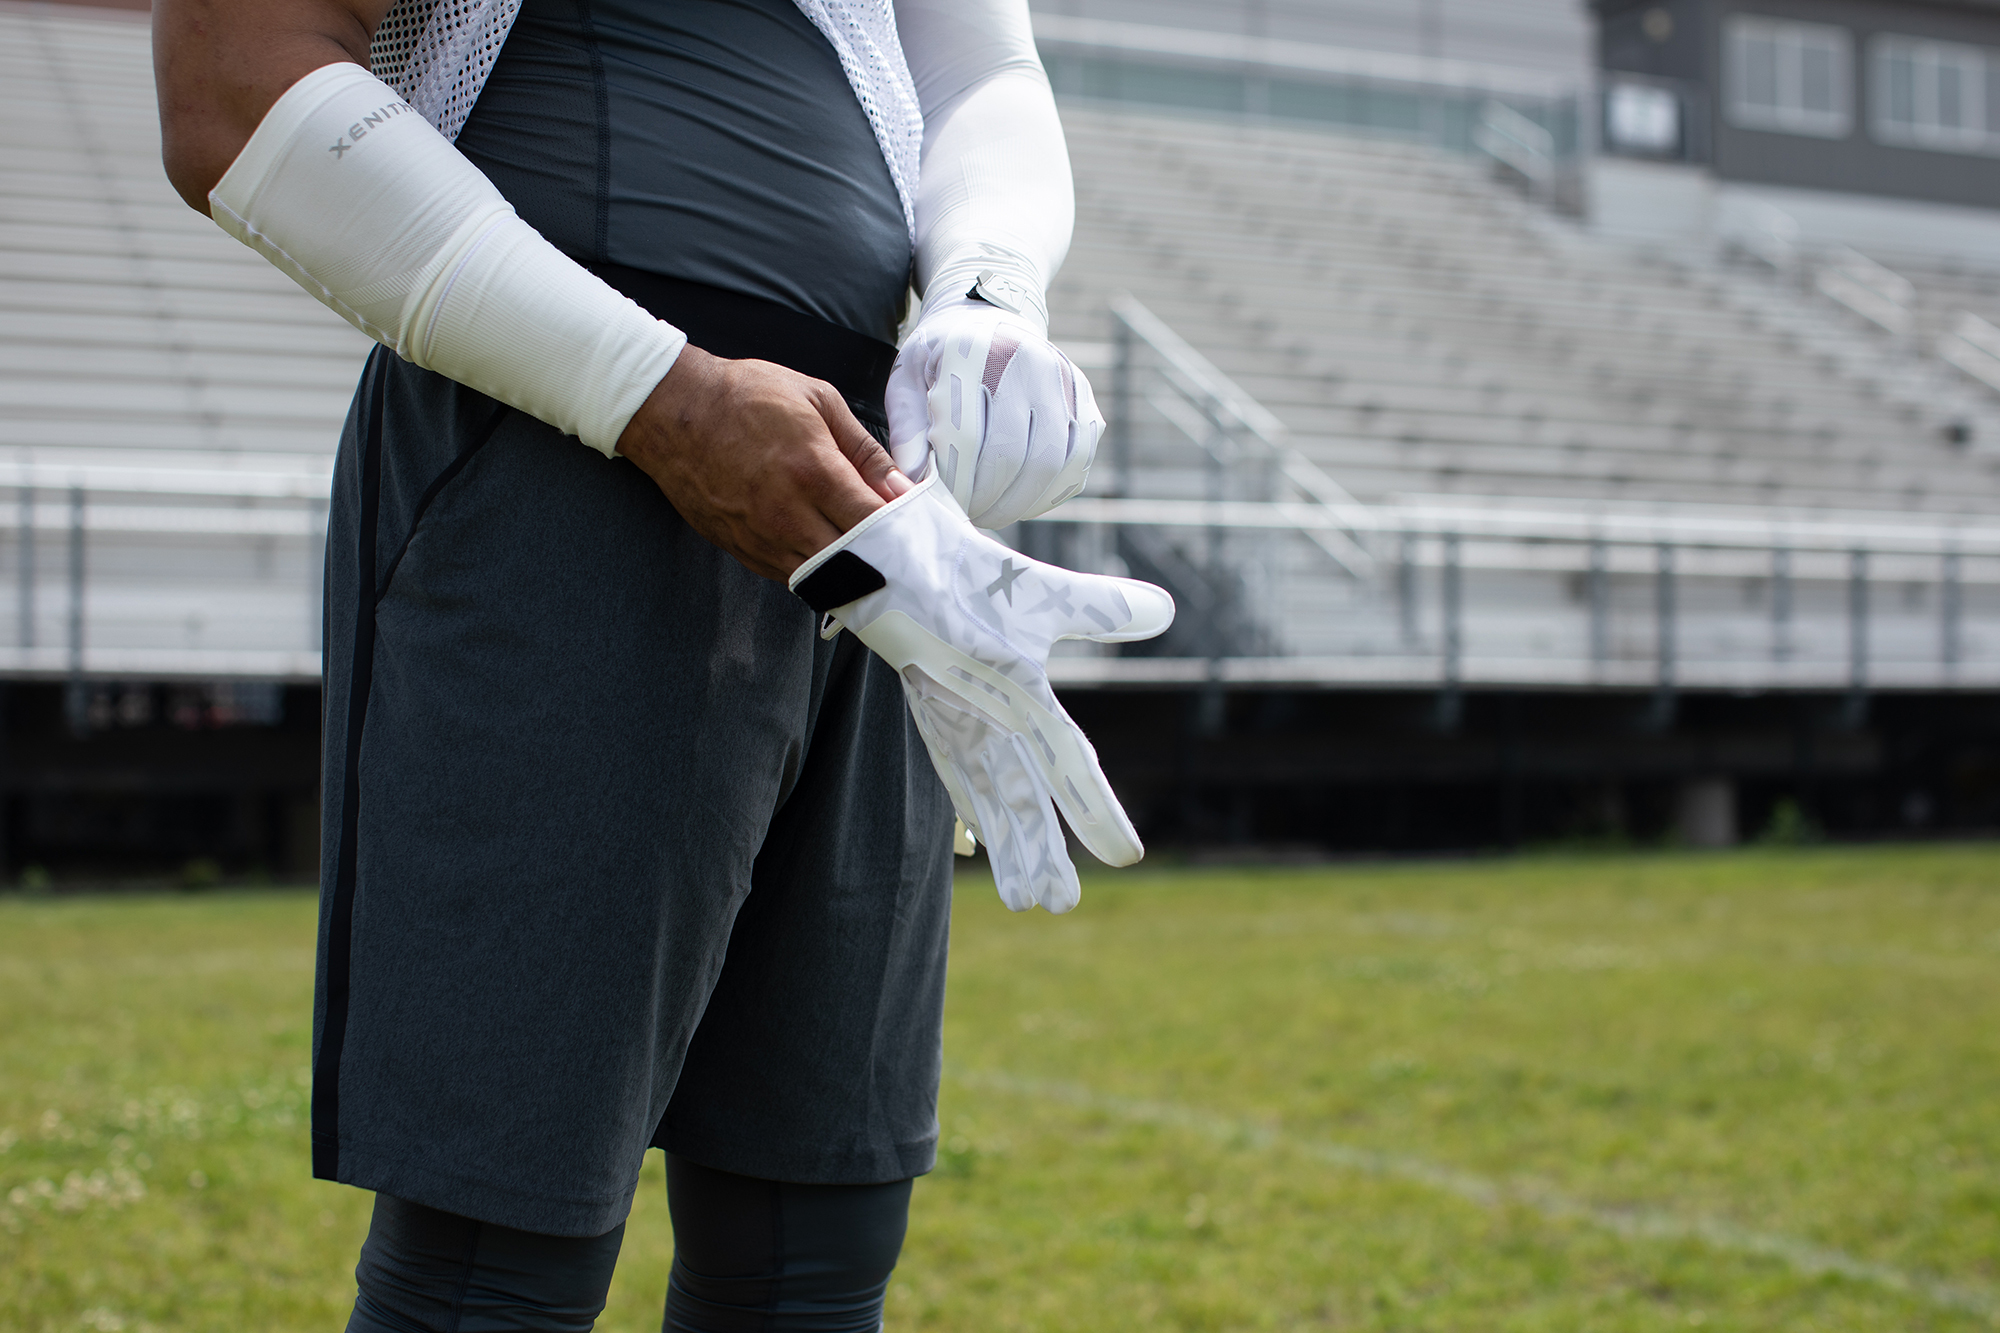 A player putting on Xenith Precision Receiver gloves.